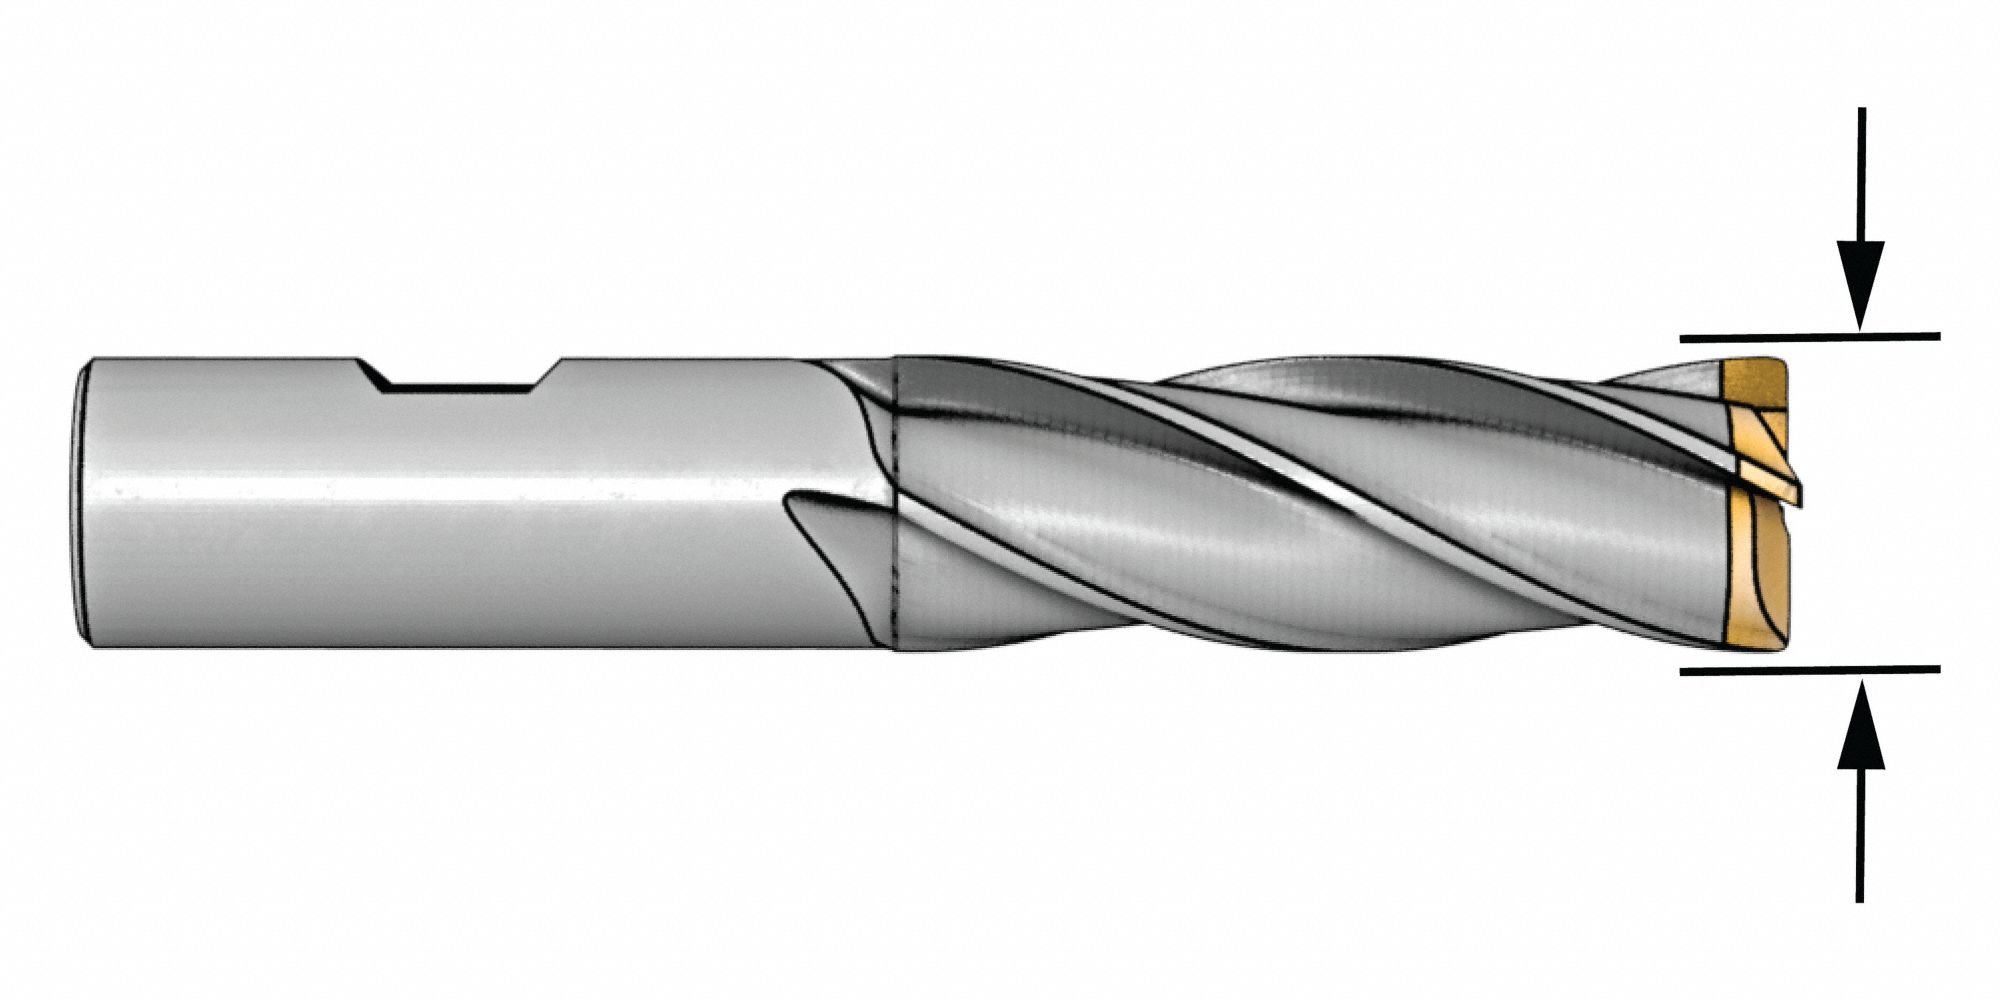 SDHM 6.00mm Milling Dia 18.00mm Length of Cut SDHM-060-3 Micro 100 End Mill Uncoated Number of Flutes: 3 